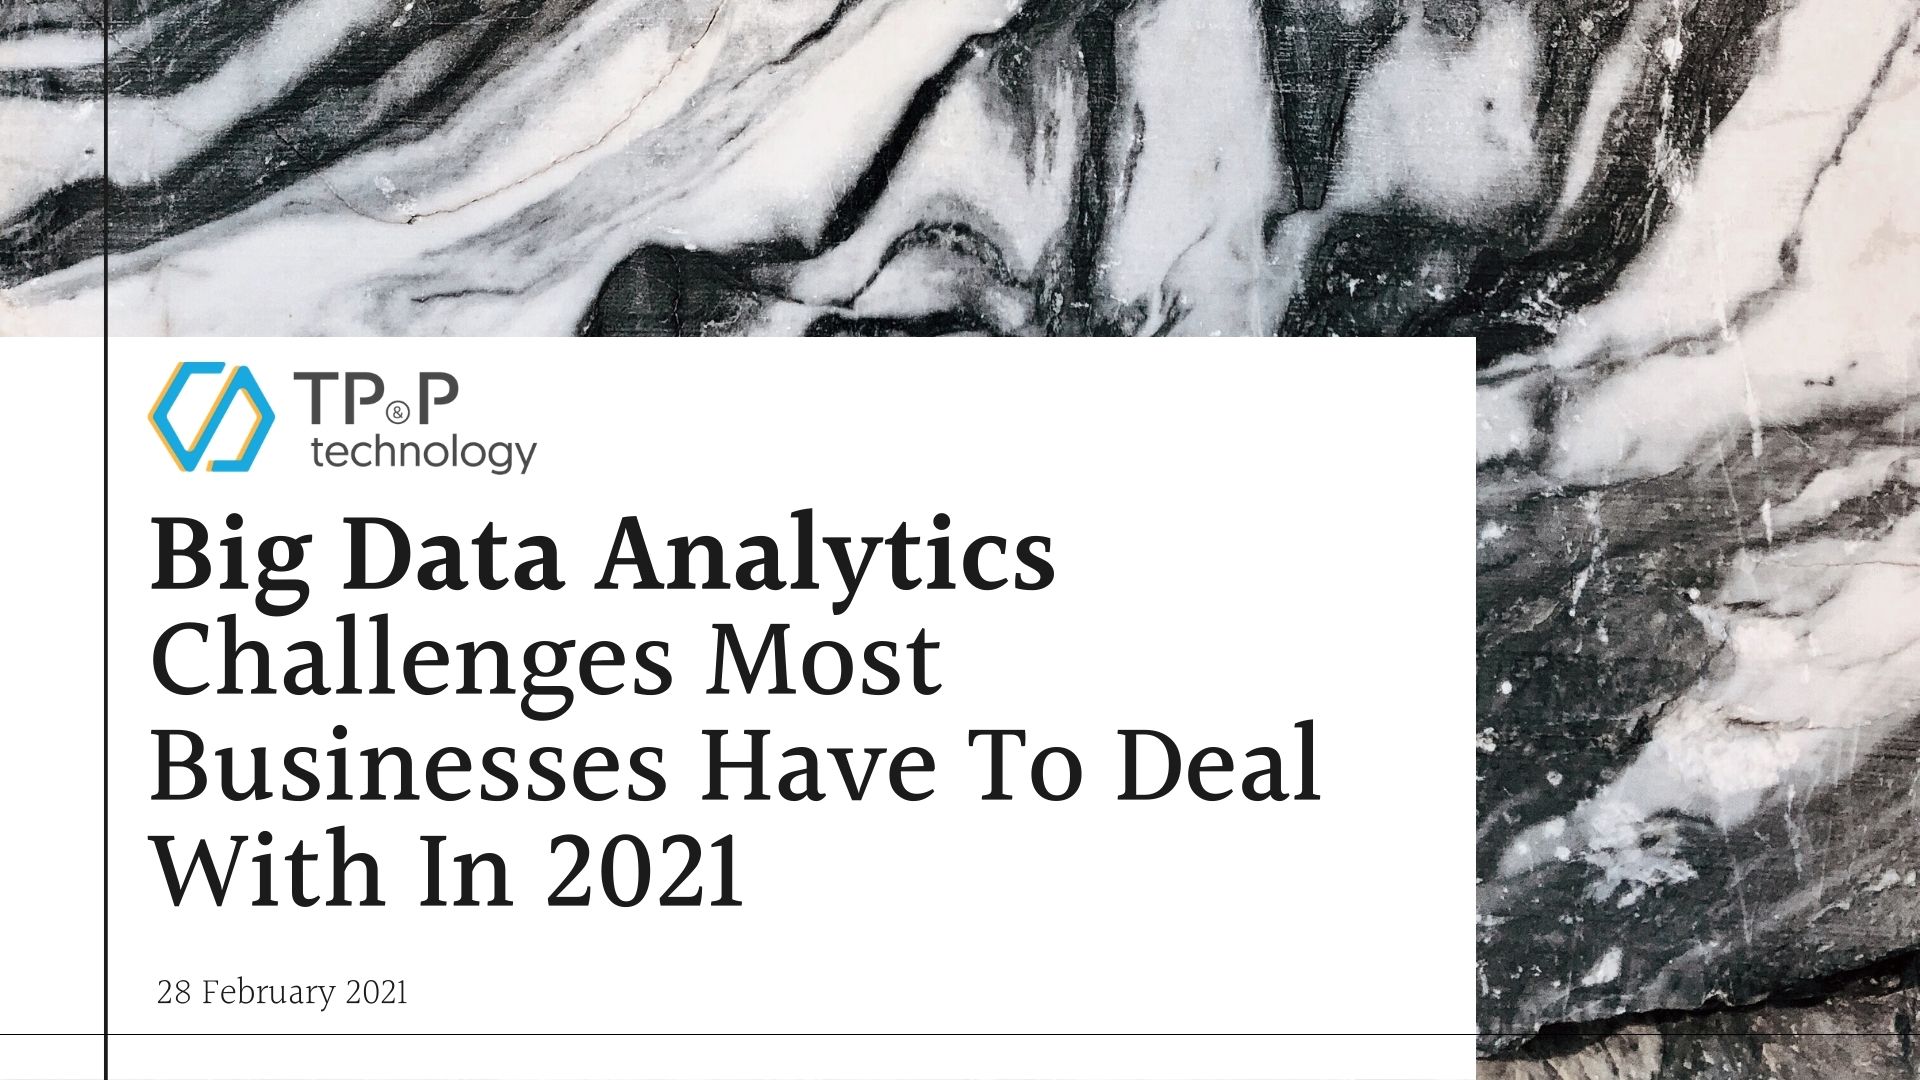 Big Data Analytics Challenges Most Businesses Have To Deal With In 2021